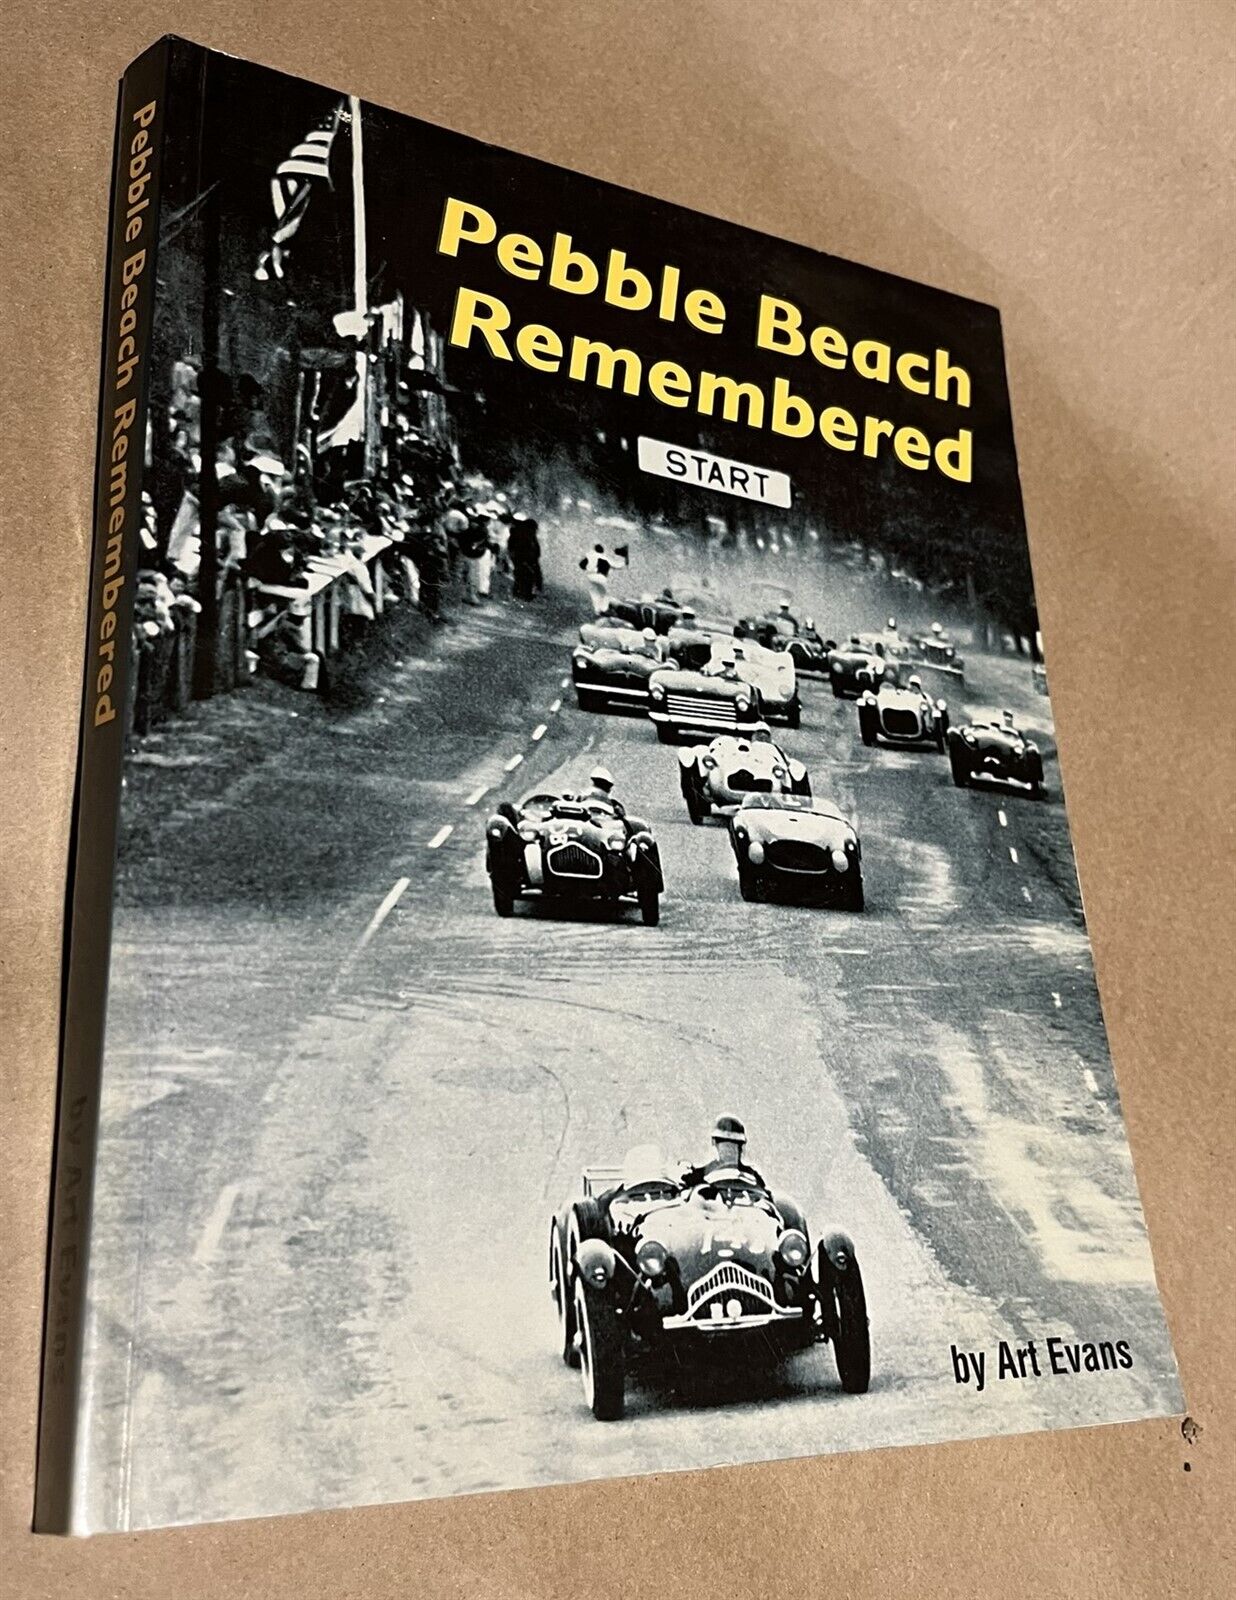 Book Pebble Beach Remembered by Art Evens